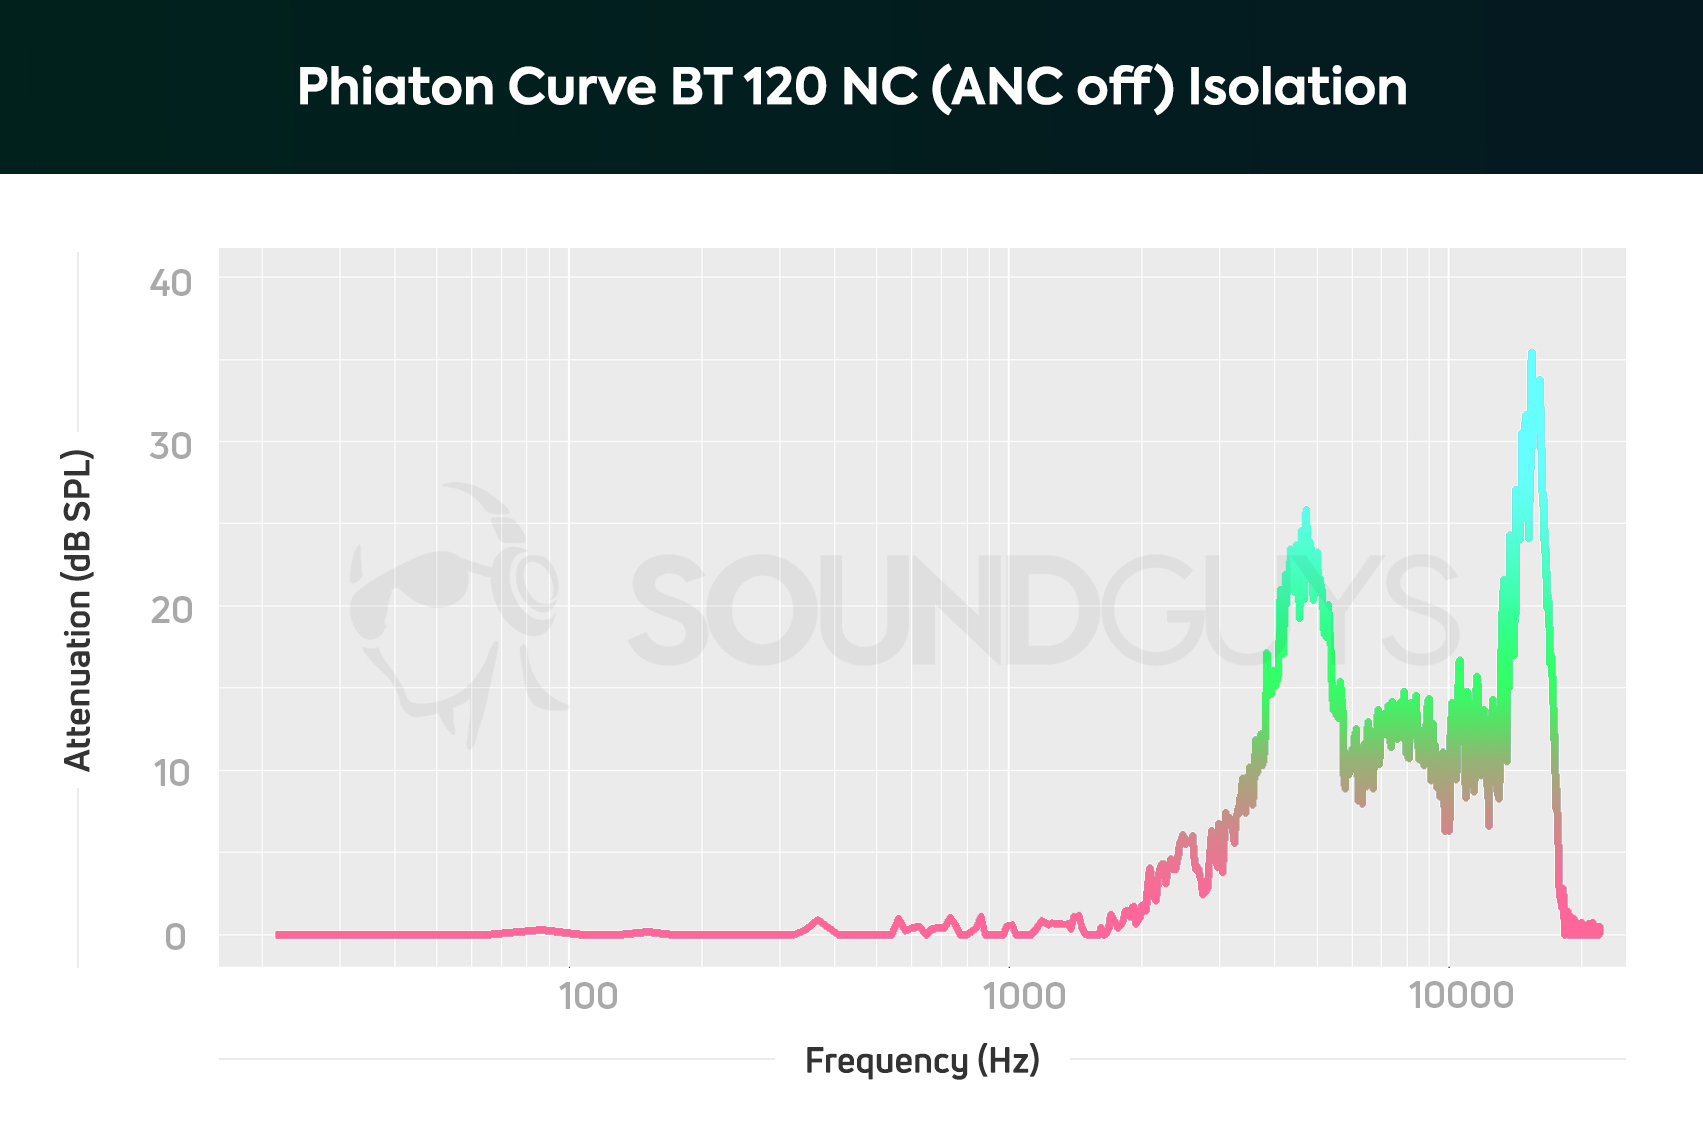 An isolation chart of the Phiaton Curve BT 120 NC with noise canceling turned off.